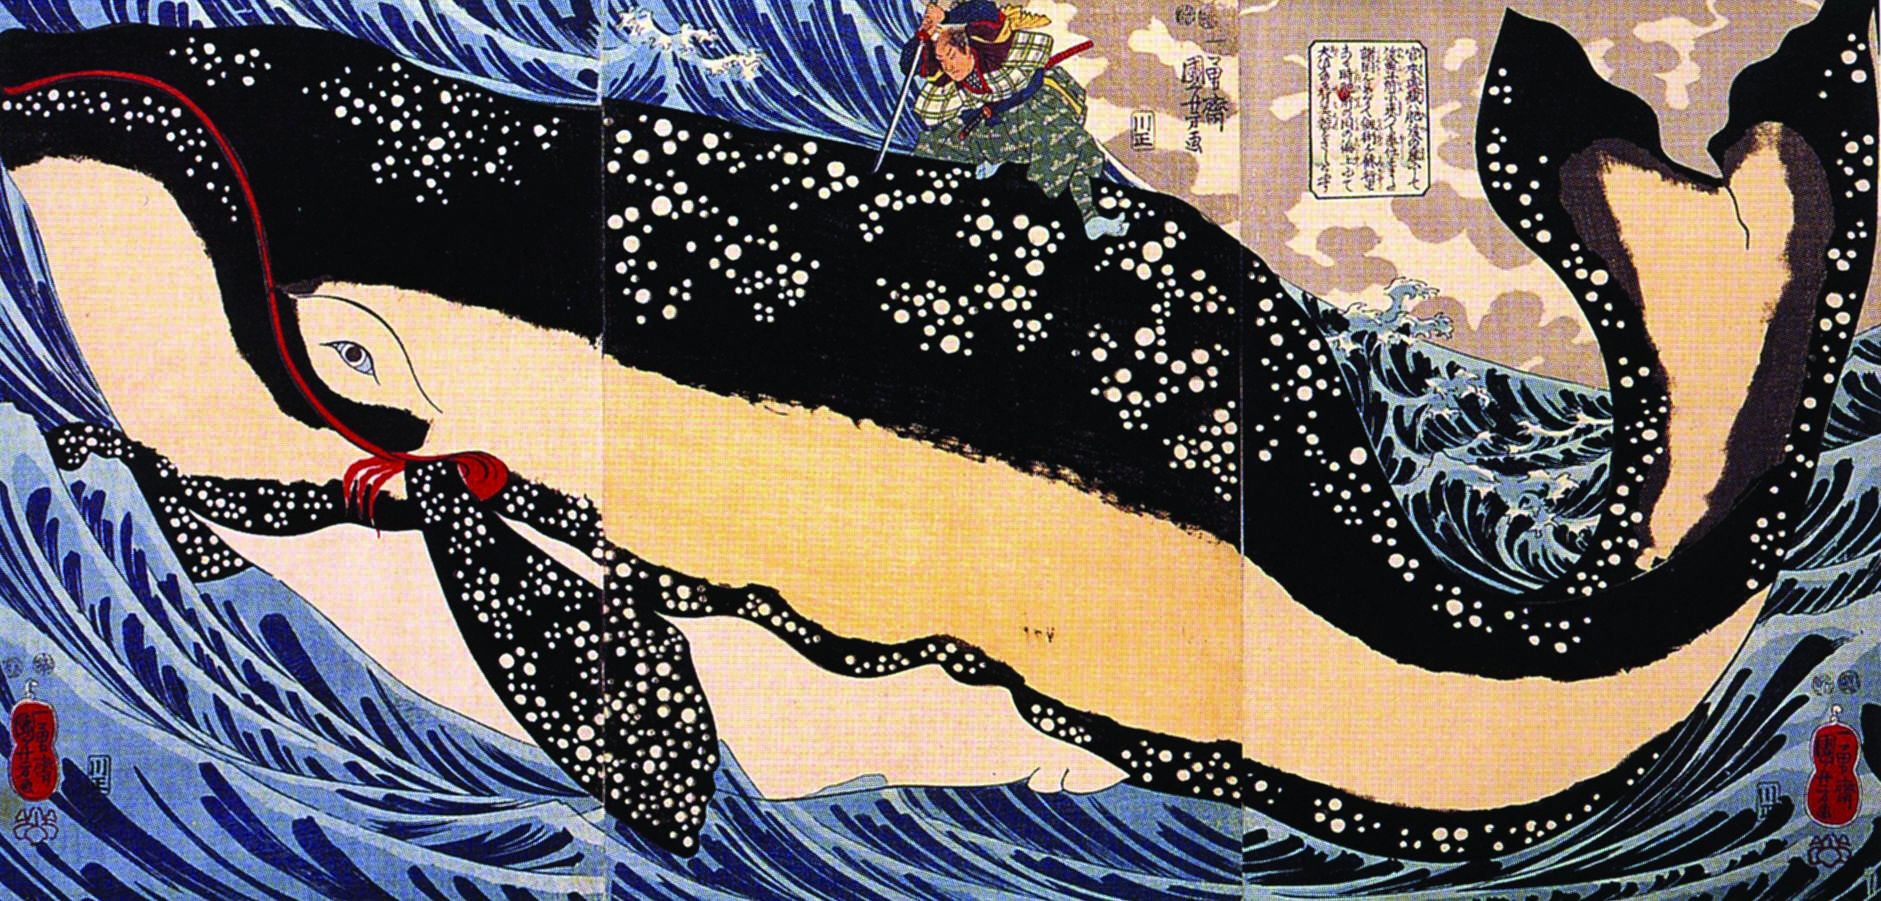 Once again in the heroic mode, Musashi plunges his sword into a giant whale he is riding bareback. 